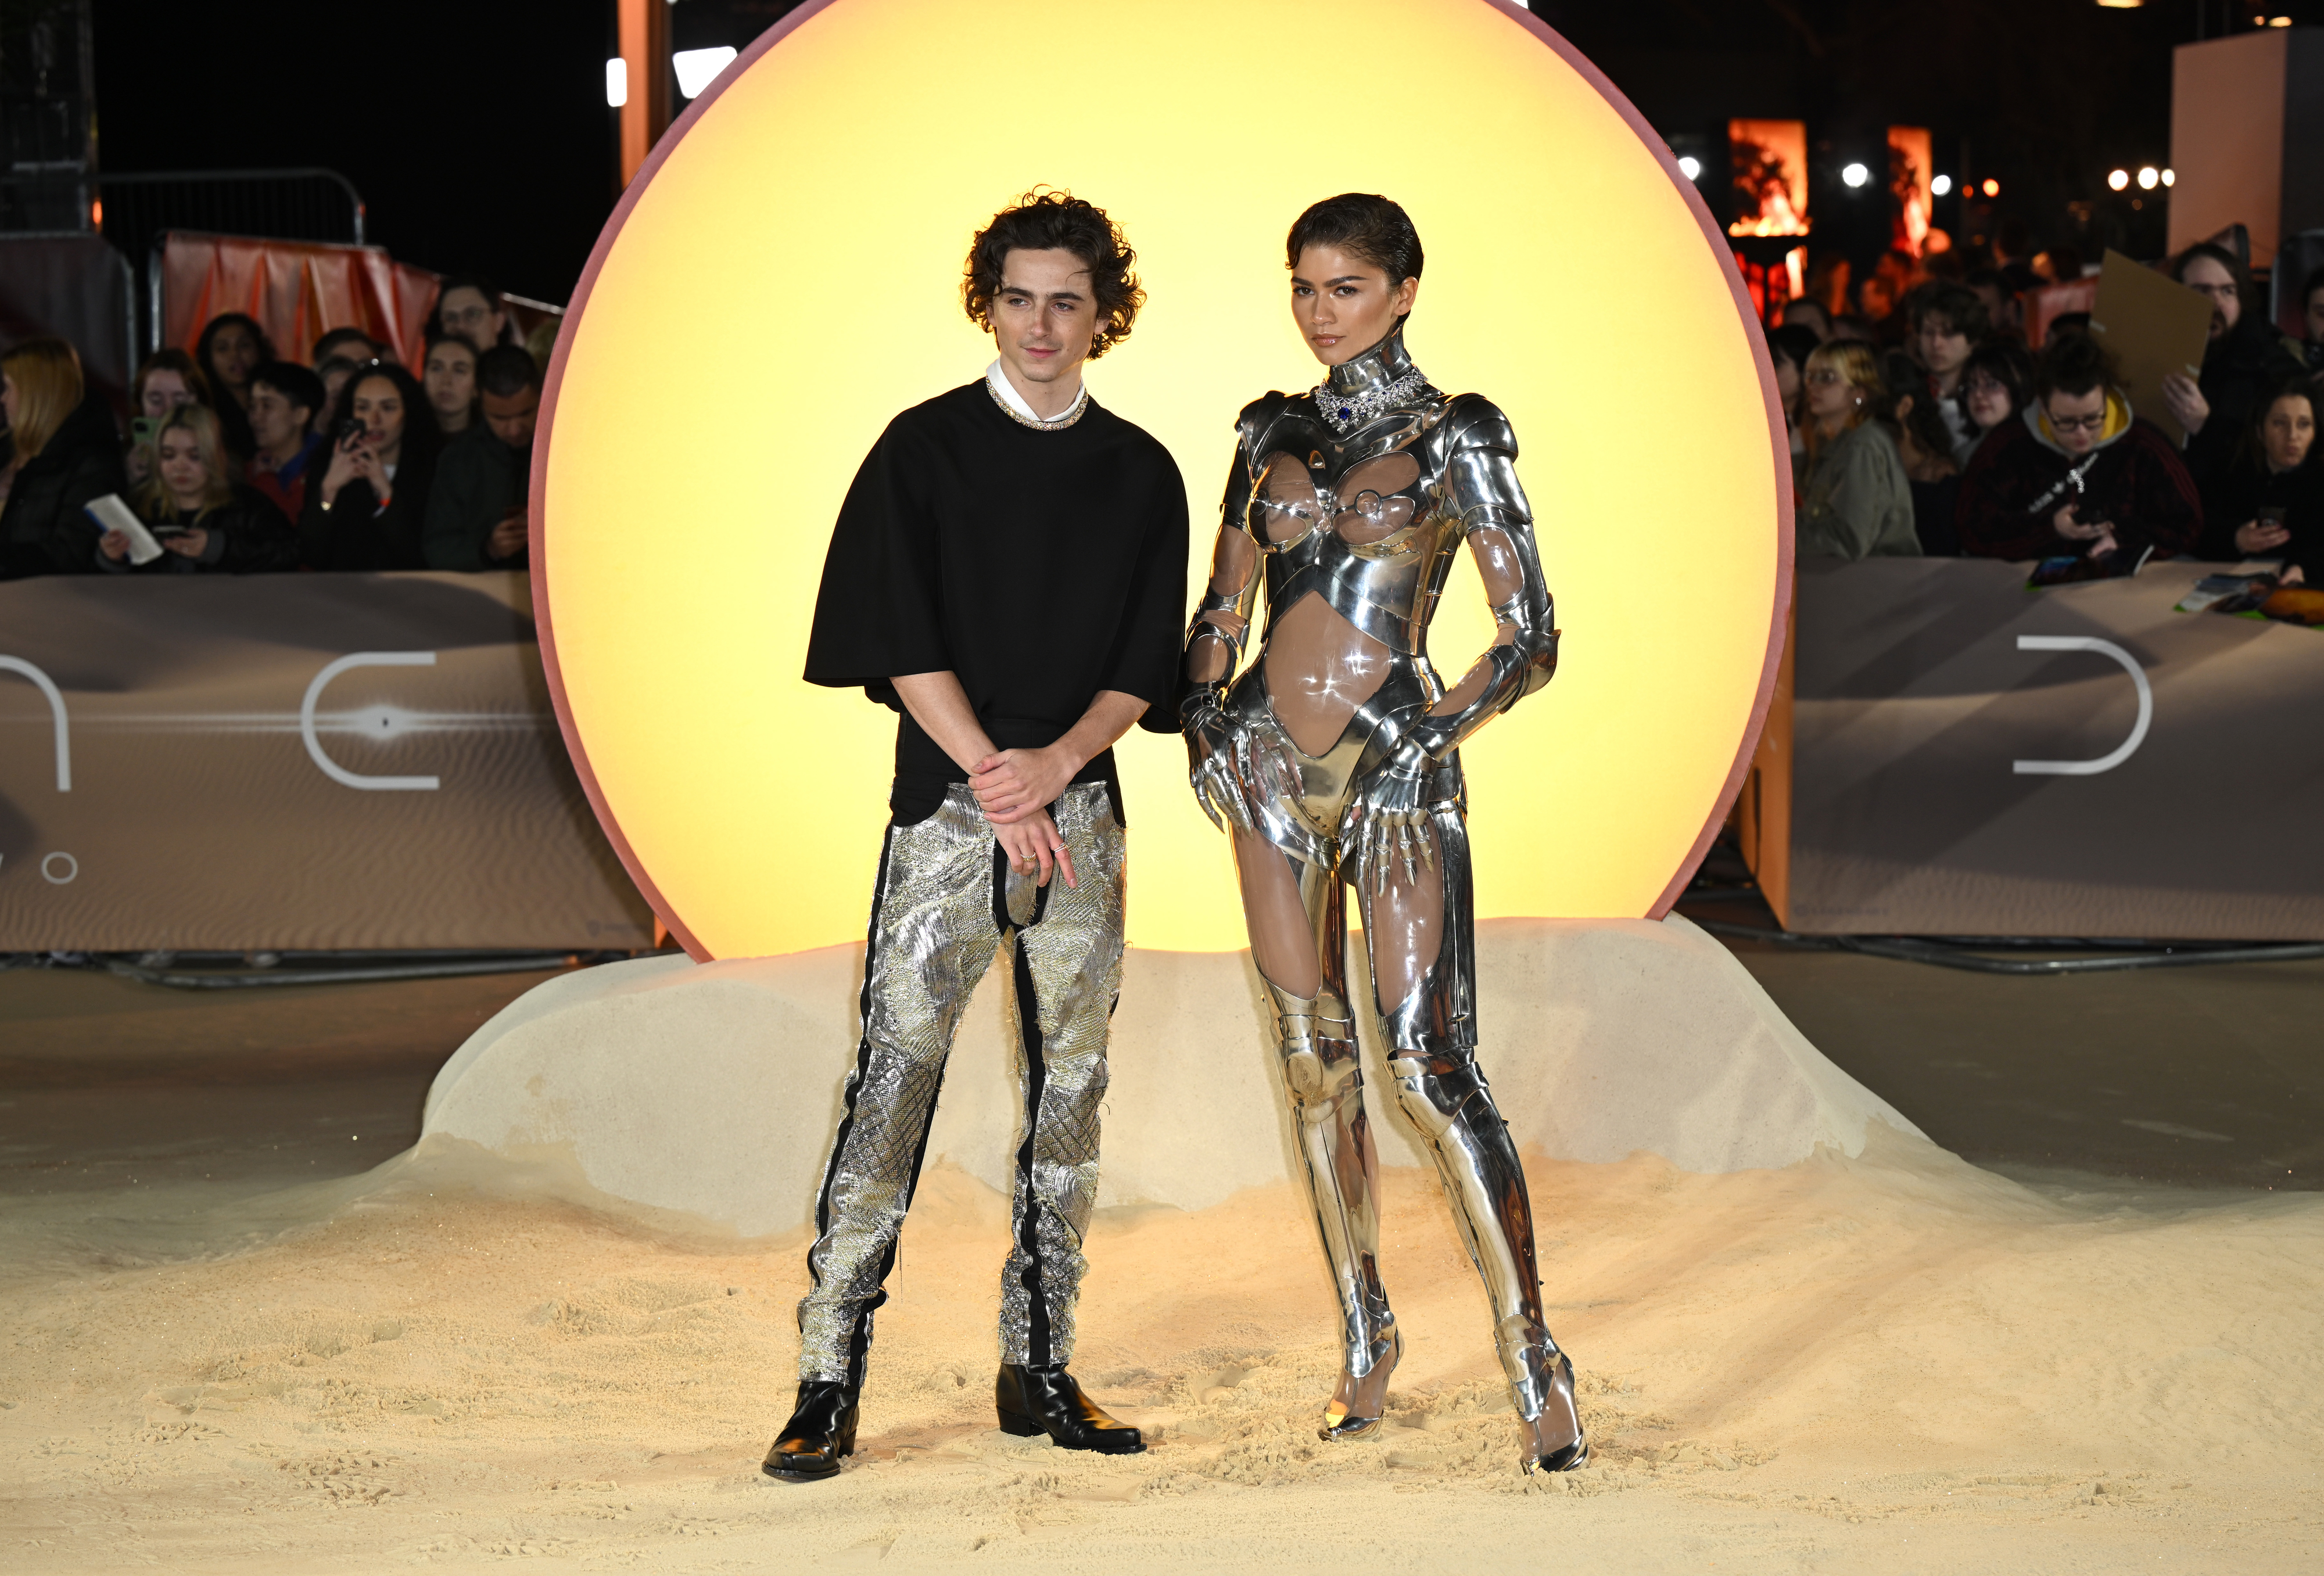 Timothée Chalamet and Zendaya on a staged area, he in a black top with metallic pants, and she in a glossy sculptural outfit